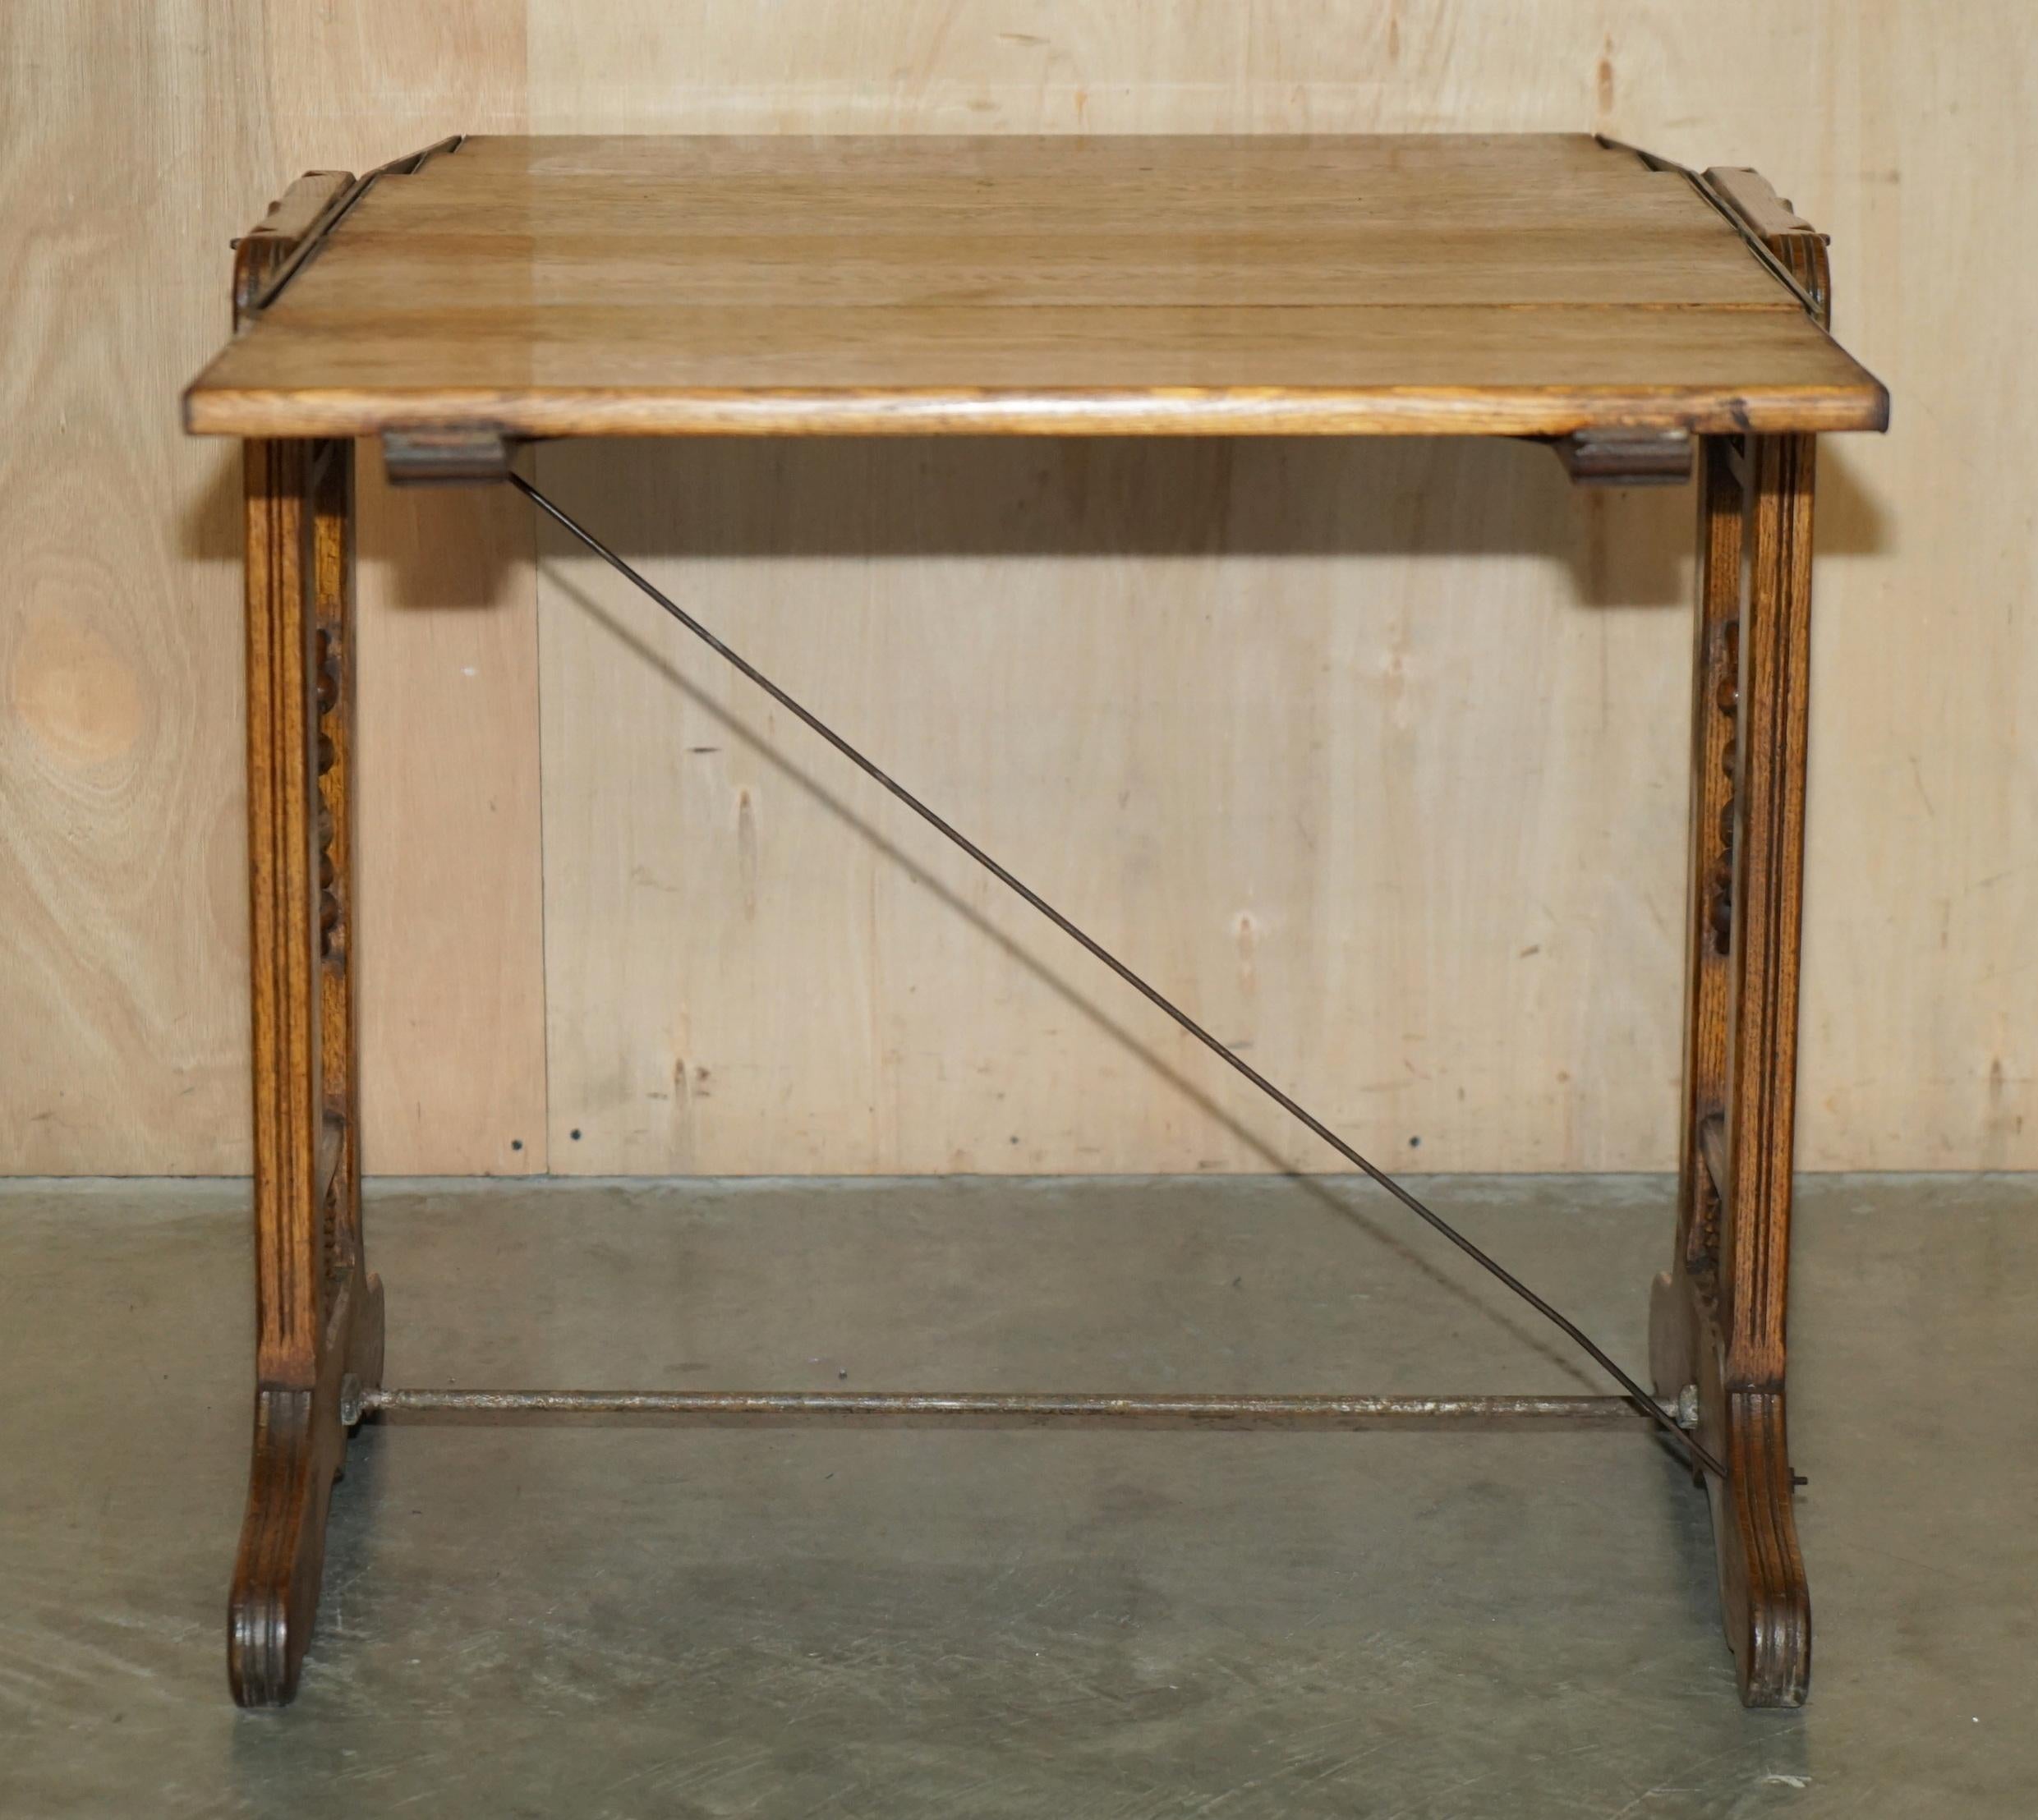 FULLY RESTORED CiRCA 1910 BOECKH BROTHERS METAMORPHIC BAKERS TABLE BOOKCASE For Sale 12